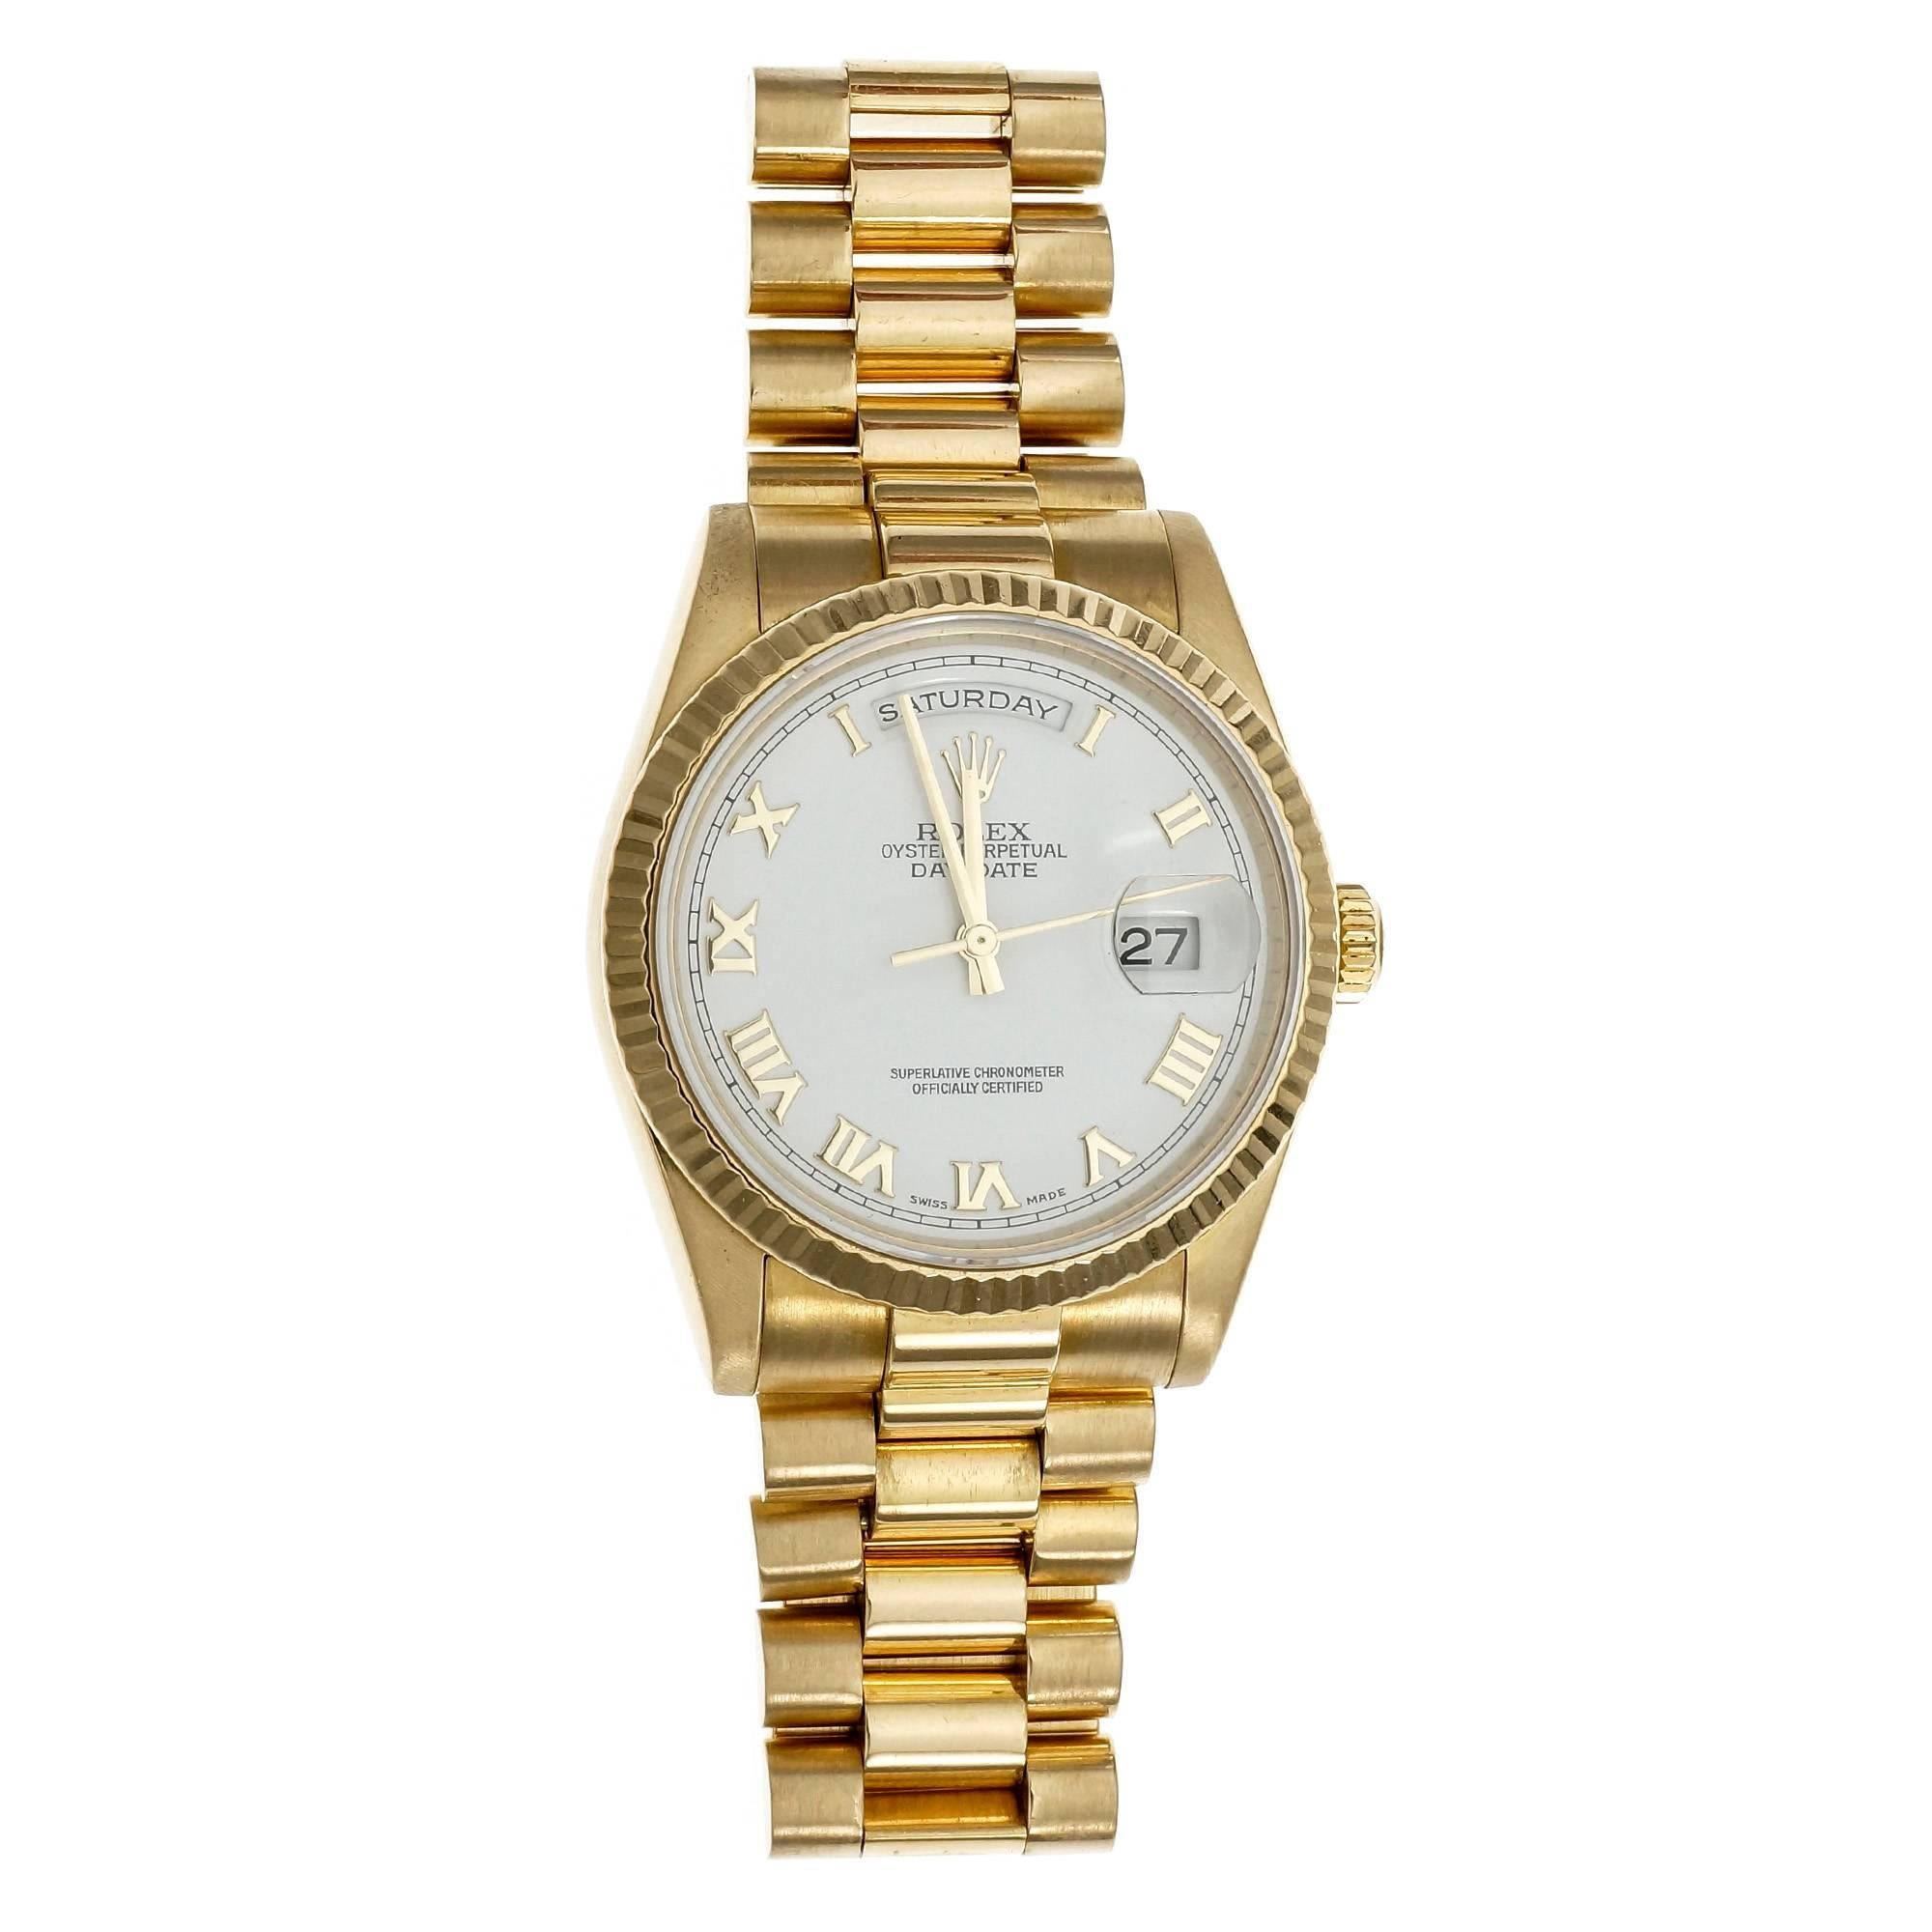 Rolex President Oyster Perpetual day date solid 18k yellow gold wrist watch circa 2003 to 2004. Roman numeral dial. 
 
18k yellow gold
Band length: 7.25 inches – can be shortened of lengthened
Length: 43mm
Width: 36mm
Band width at case: 20mm
Case